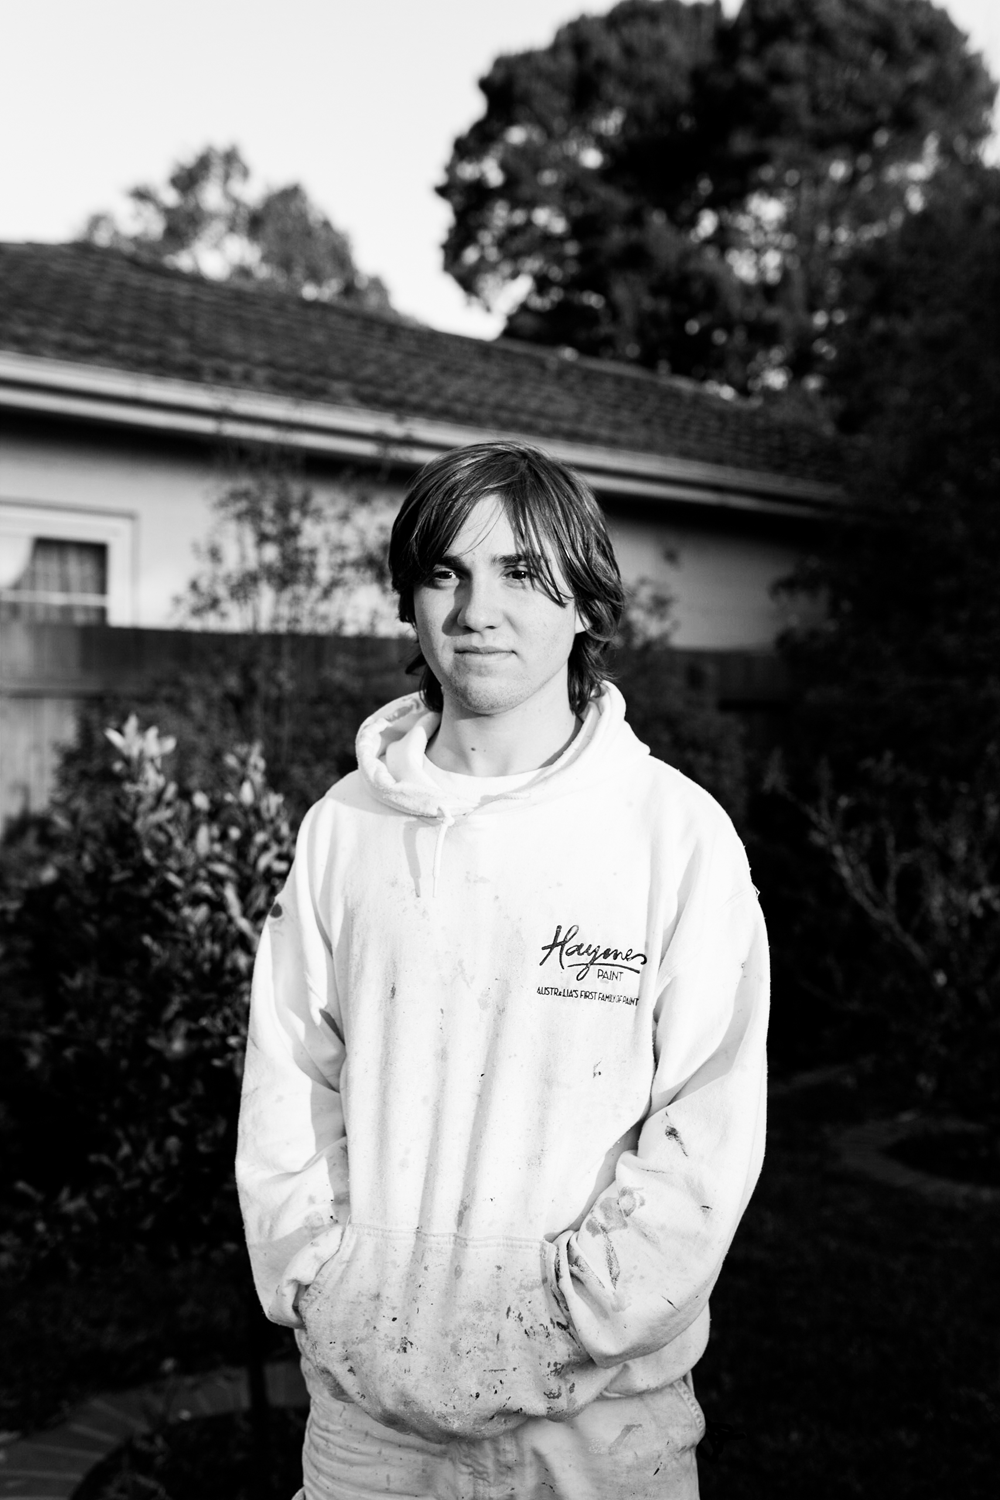 Black and white photograph of a portrait of a young man standing in suburban backyard wearing paint covered jumper.